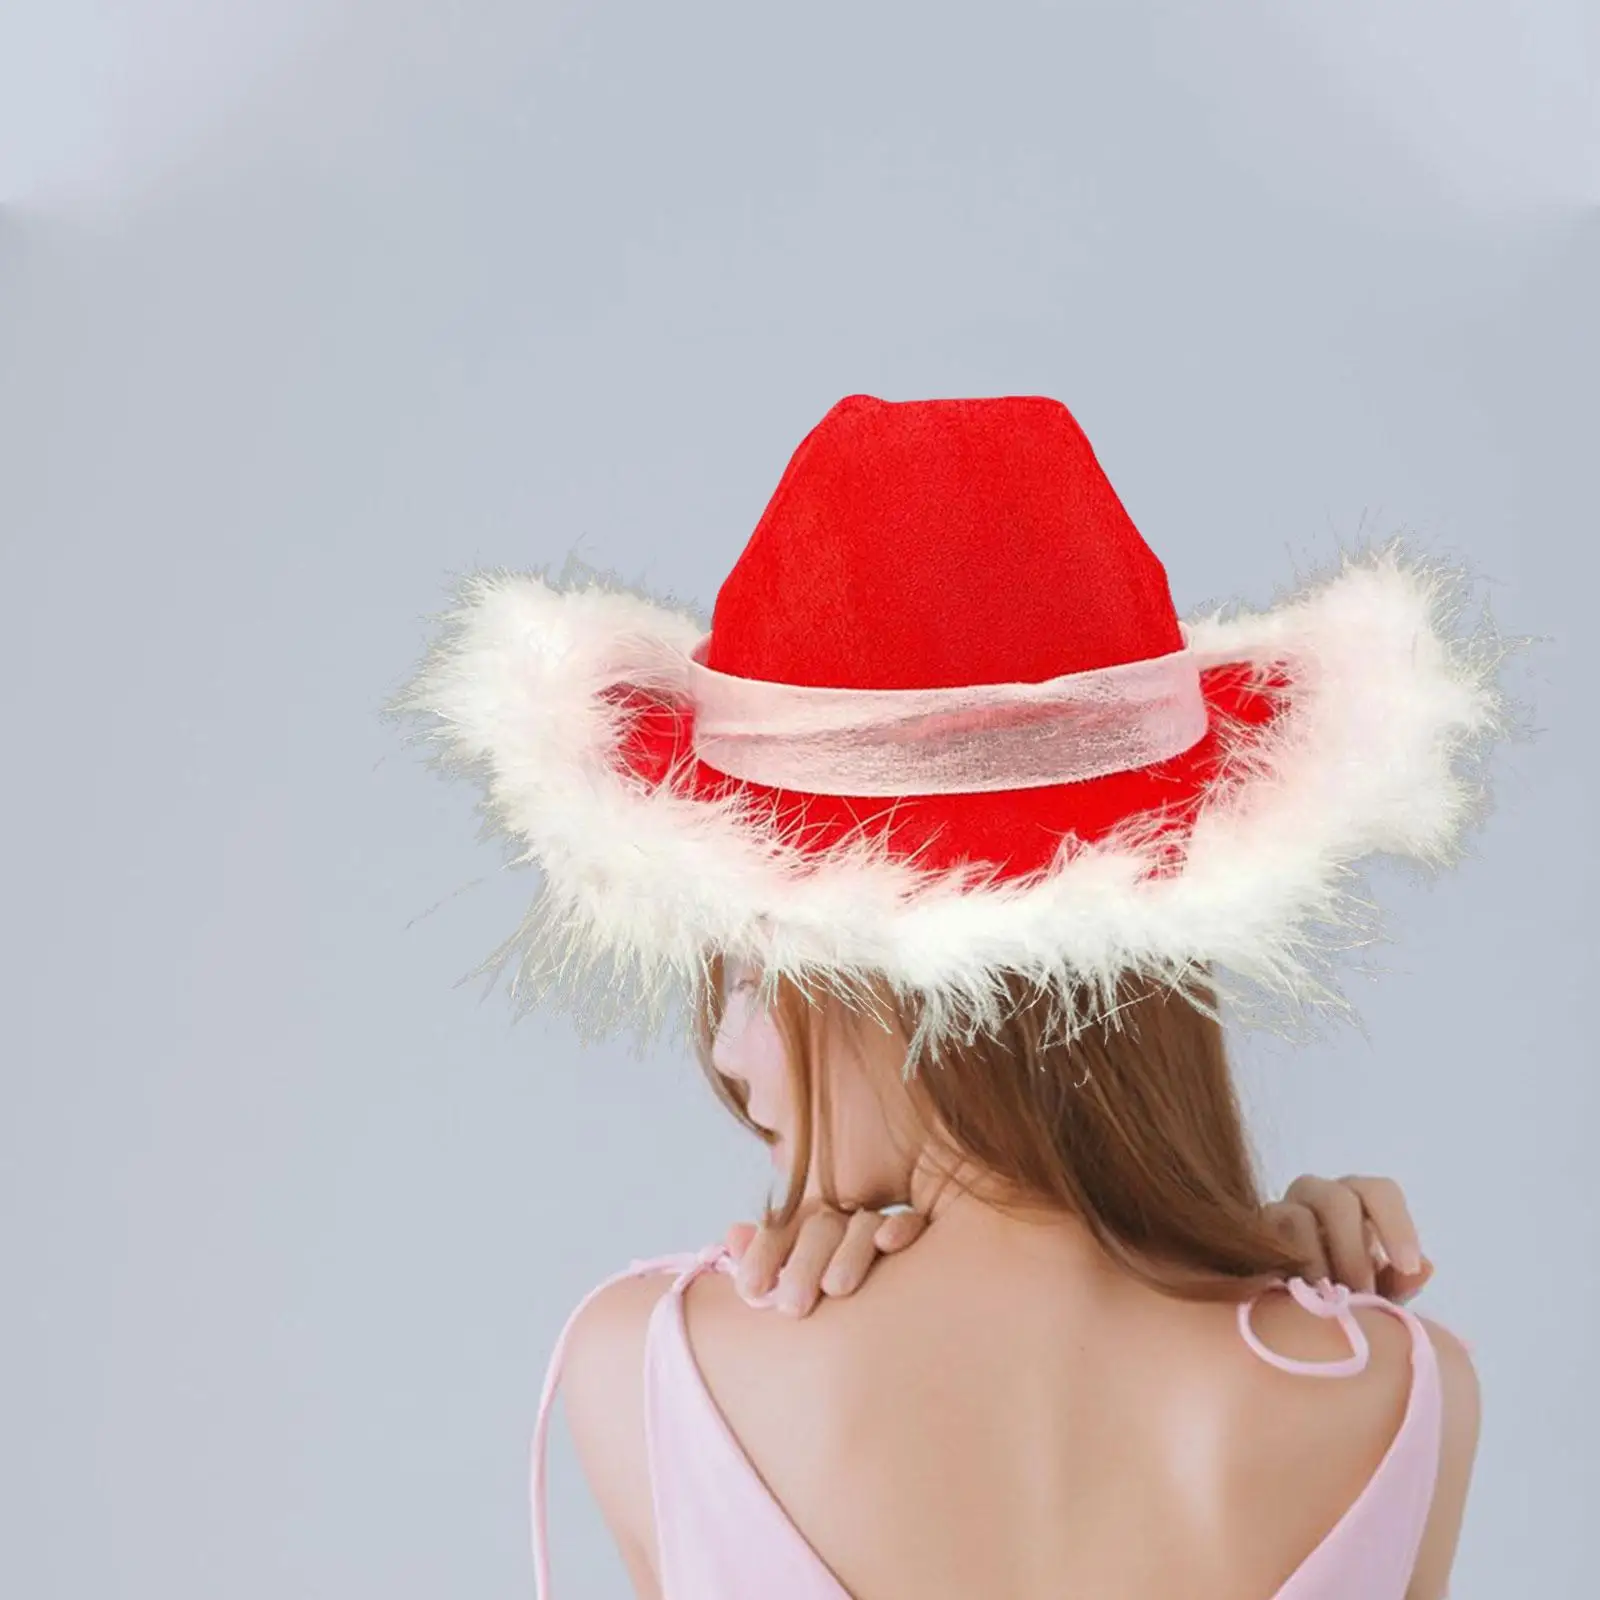  Hat Western Supply Cowgirl Hat for Christmas Fancy Dress Theme Party